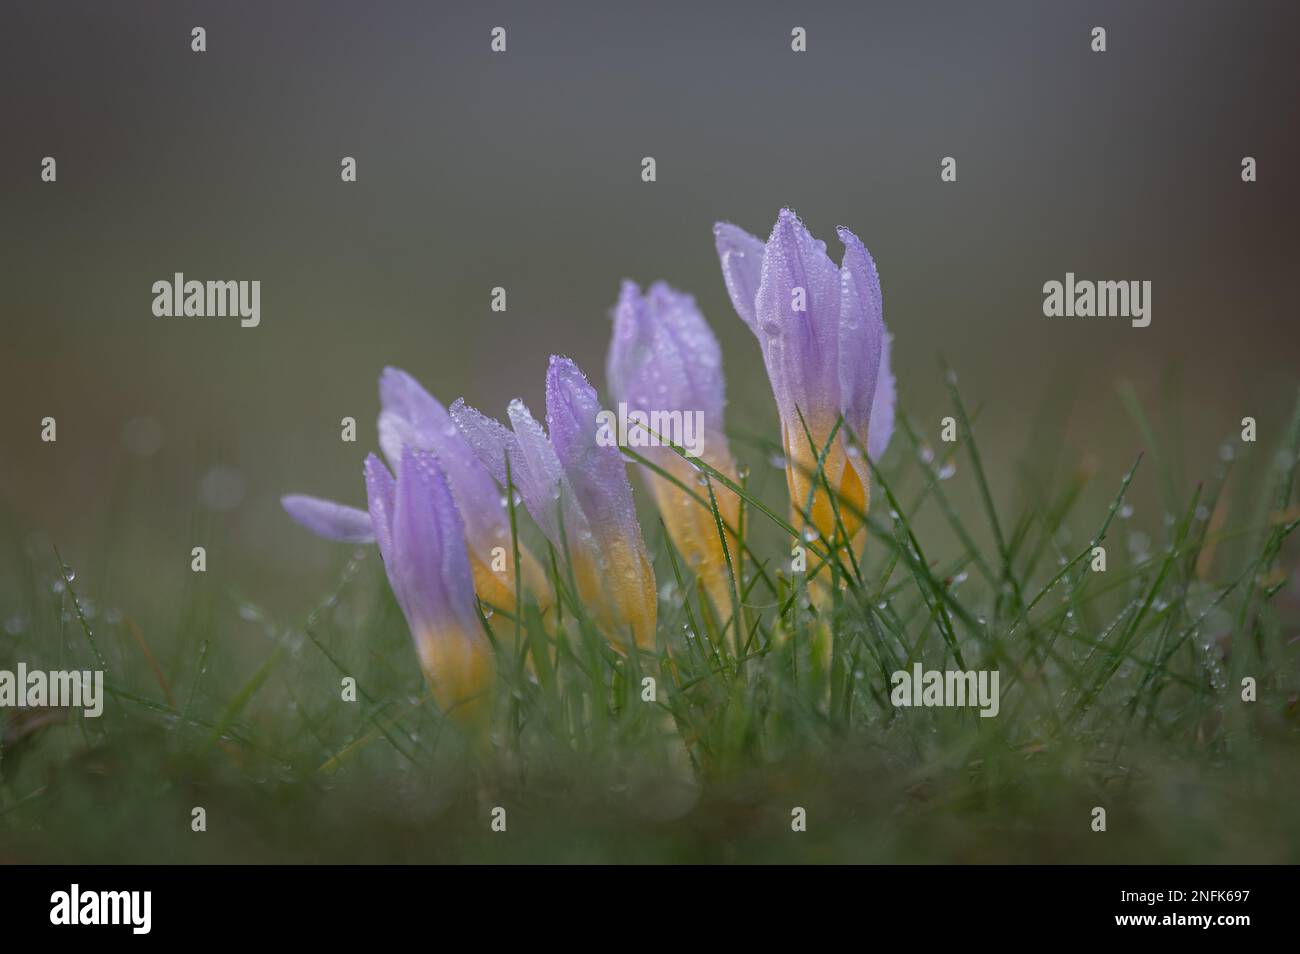 Crocuses (croci) in a morning dew. Stock Photo